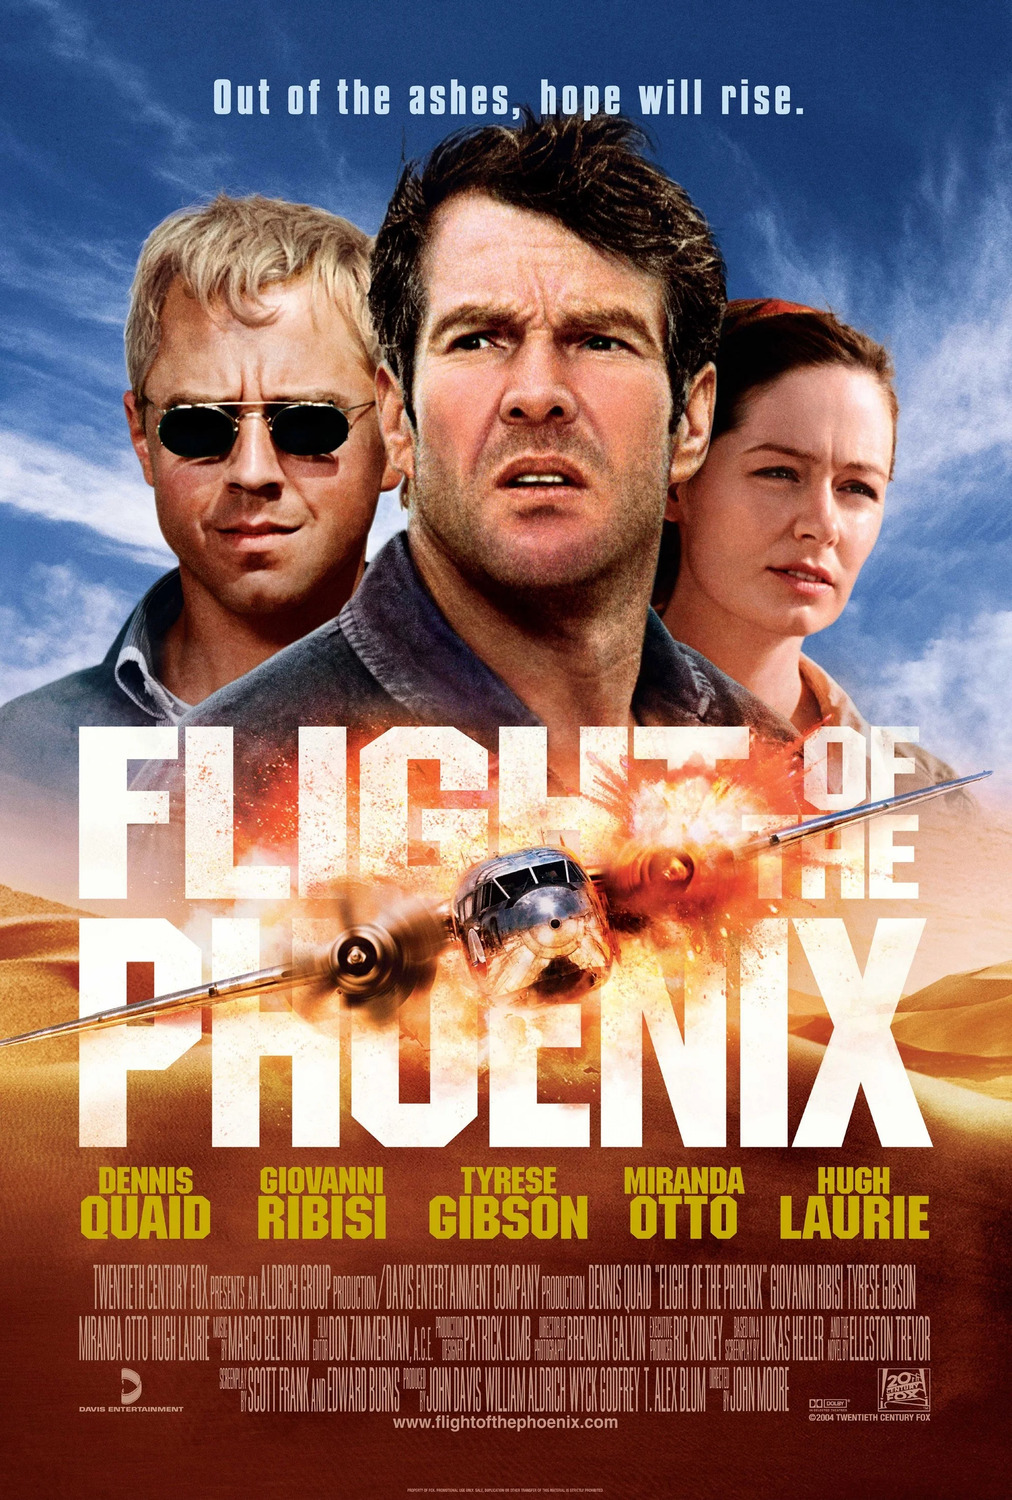 Extra Large Movie Poster Image for Flight of the Phoenix (#4 of 5)